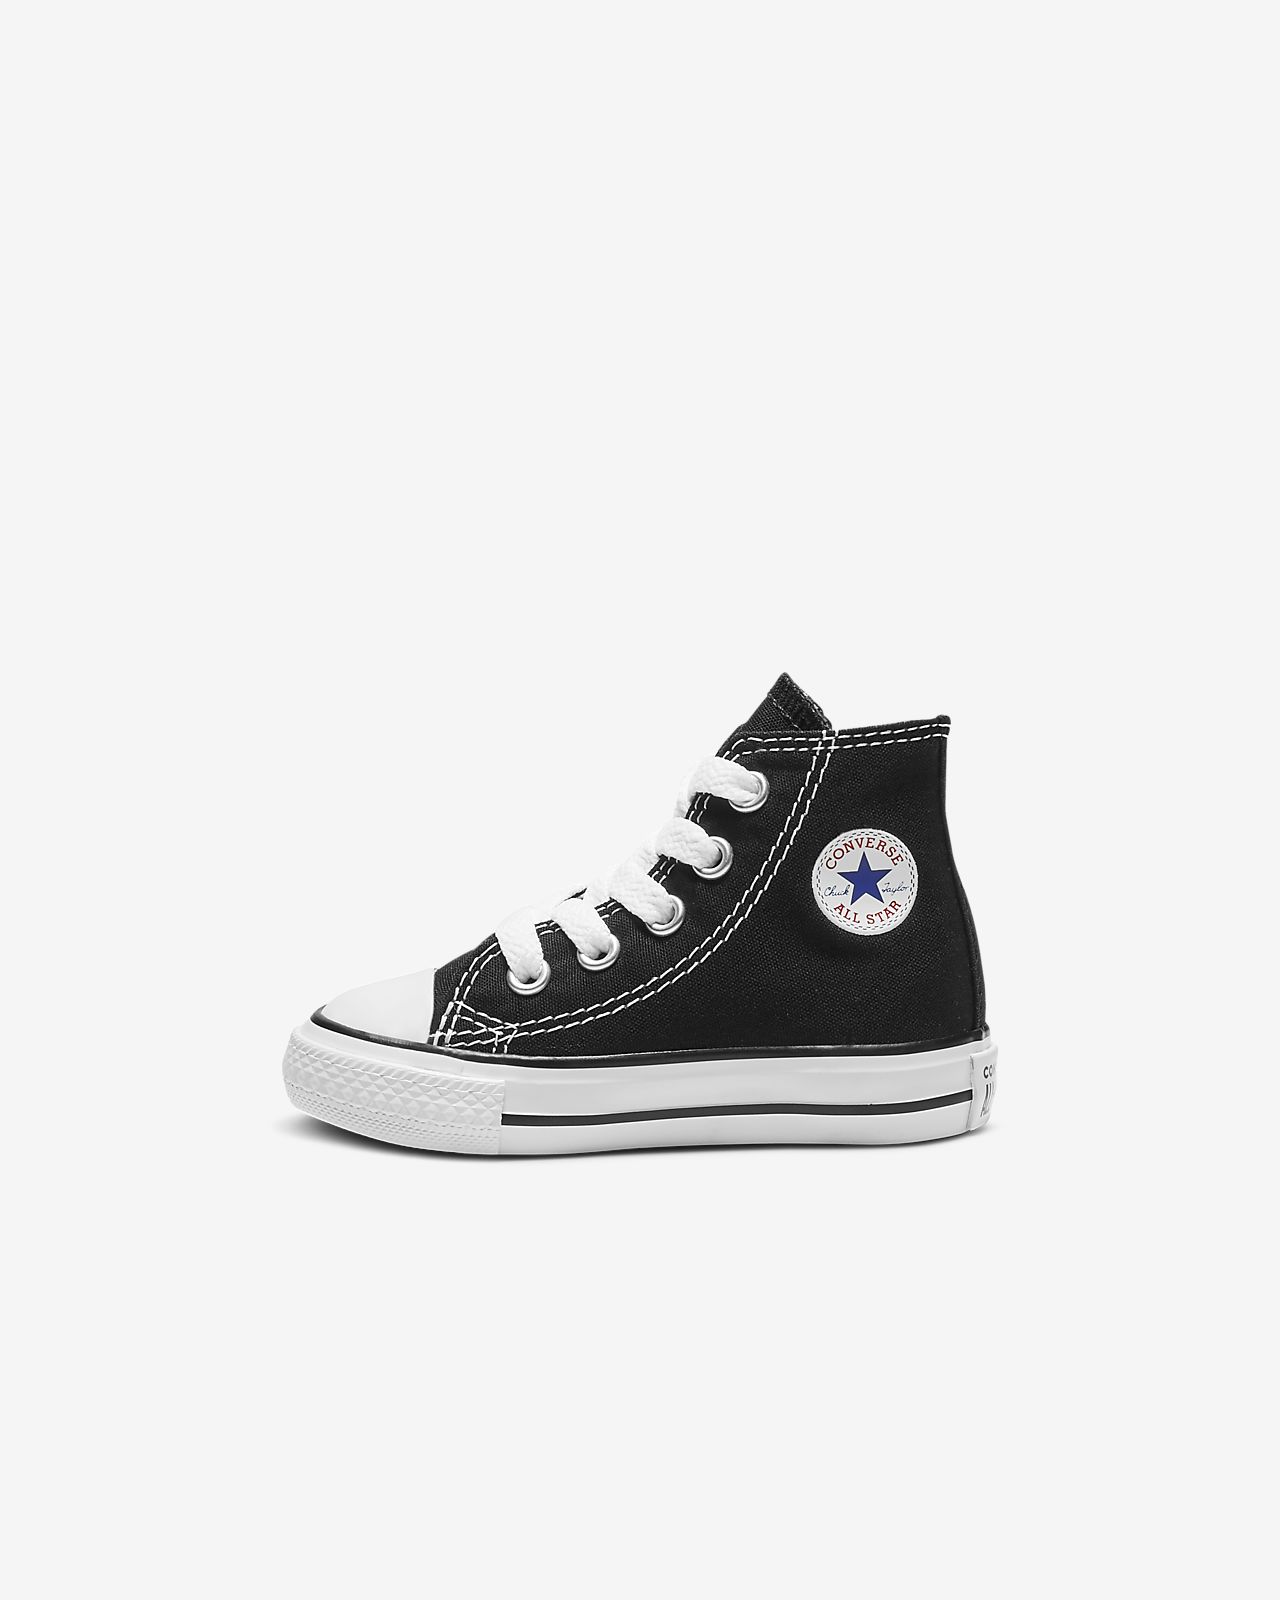 converse all star ksa converse all star ksa converse all star ksa converse  all star ksa converse all star ksa Converse Saudi Arabia - Photos |  Facebook converse all star ksa Converse Kids' X Batman Chuck Taylor All  Star High Top Shoe (Baby converse all 